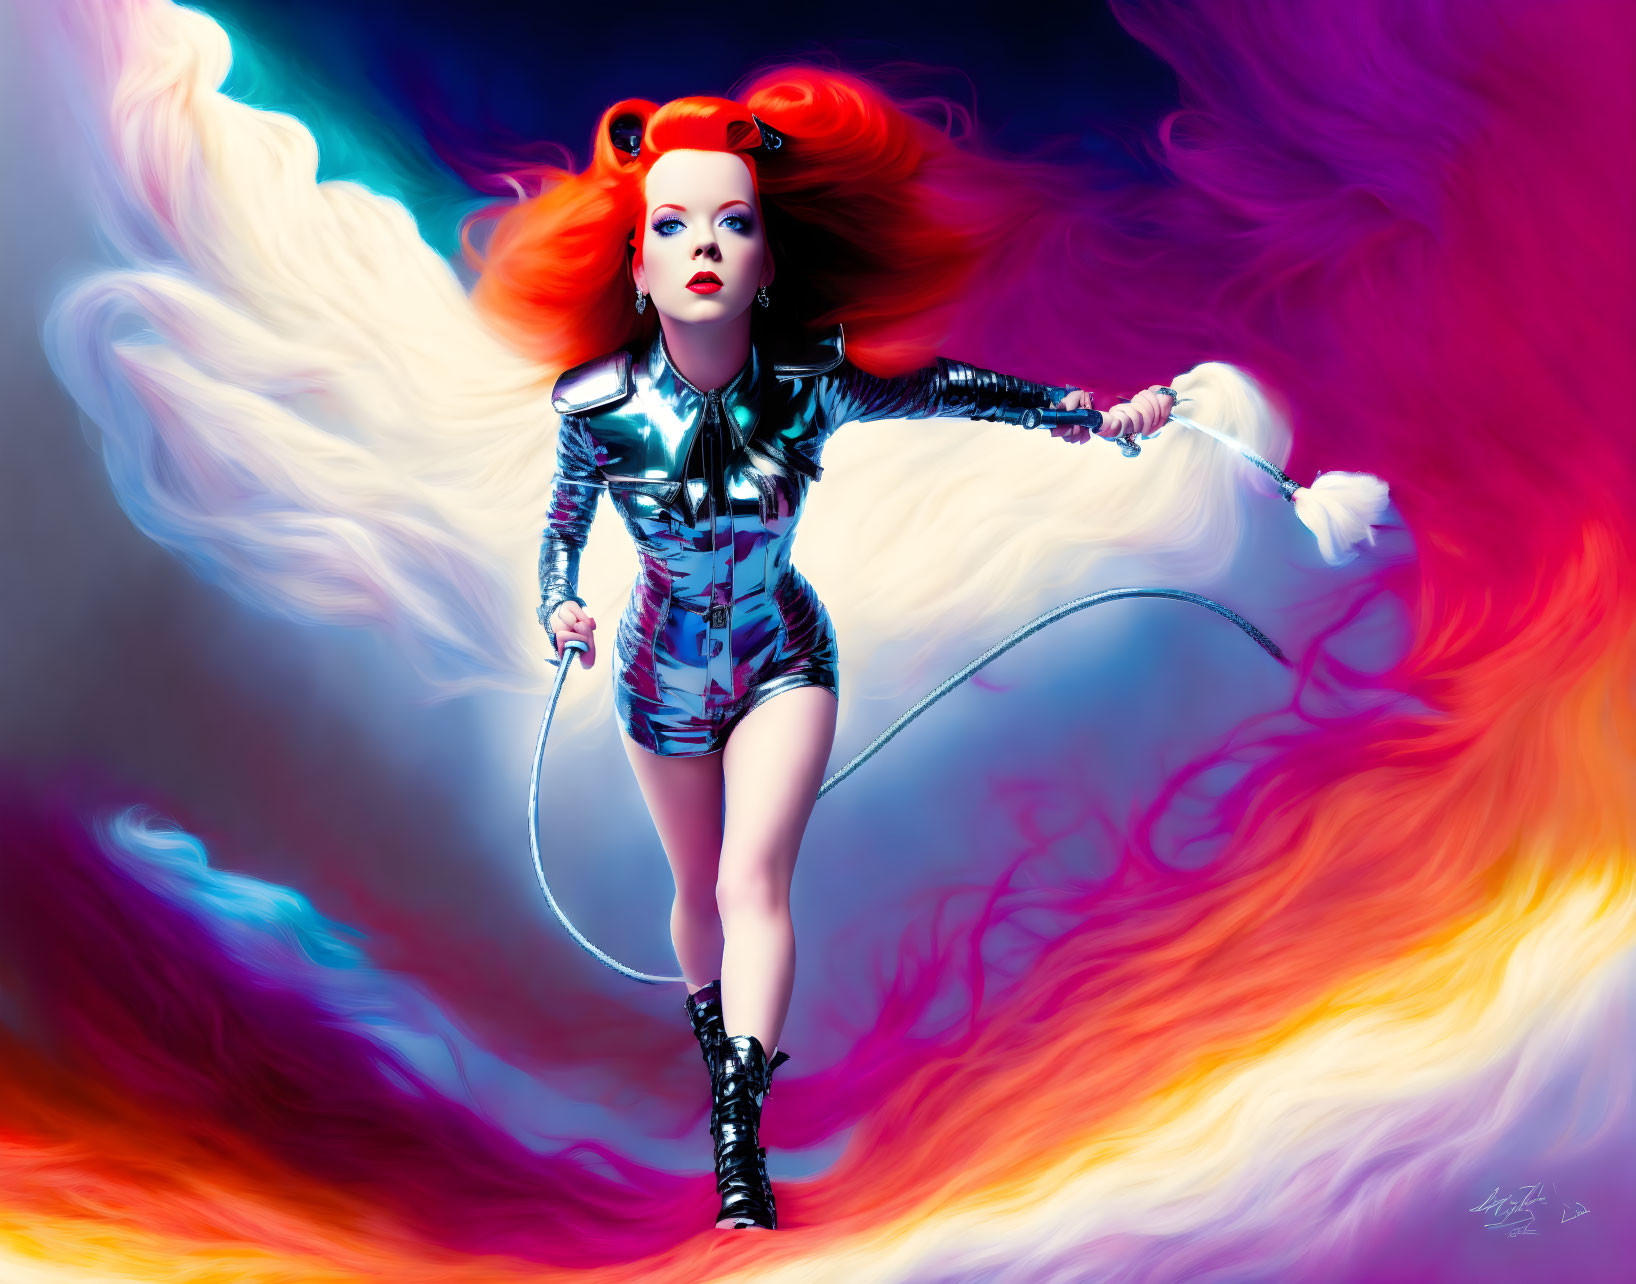 Vibrant red-haired woman with jump rope in surreal digital art